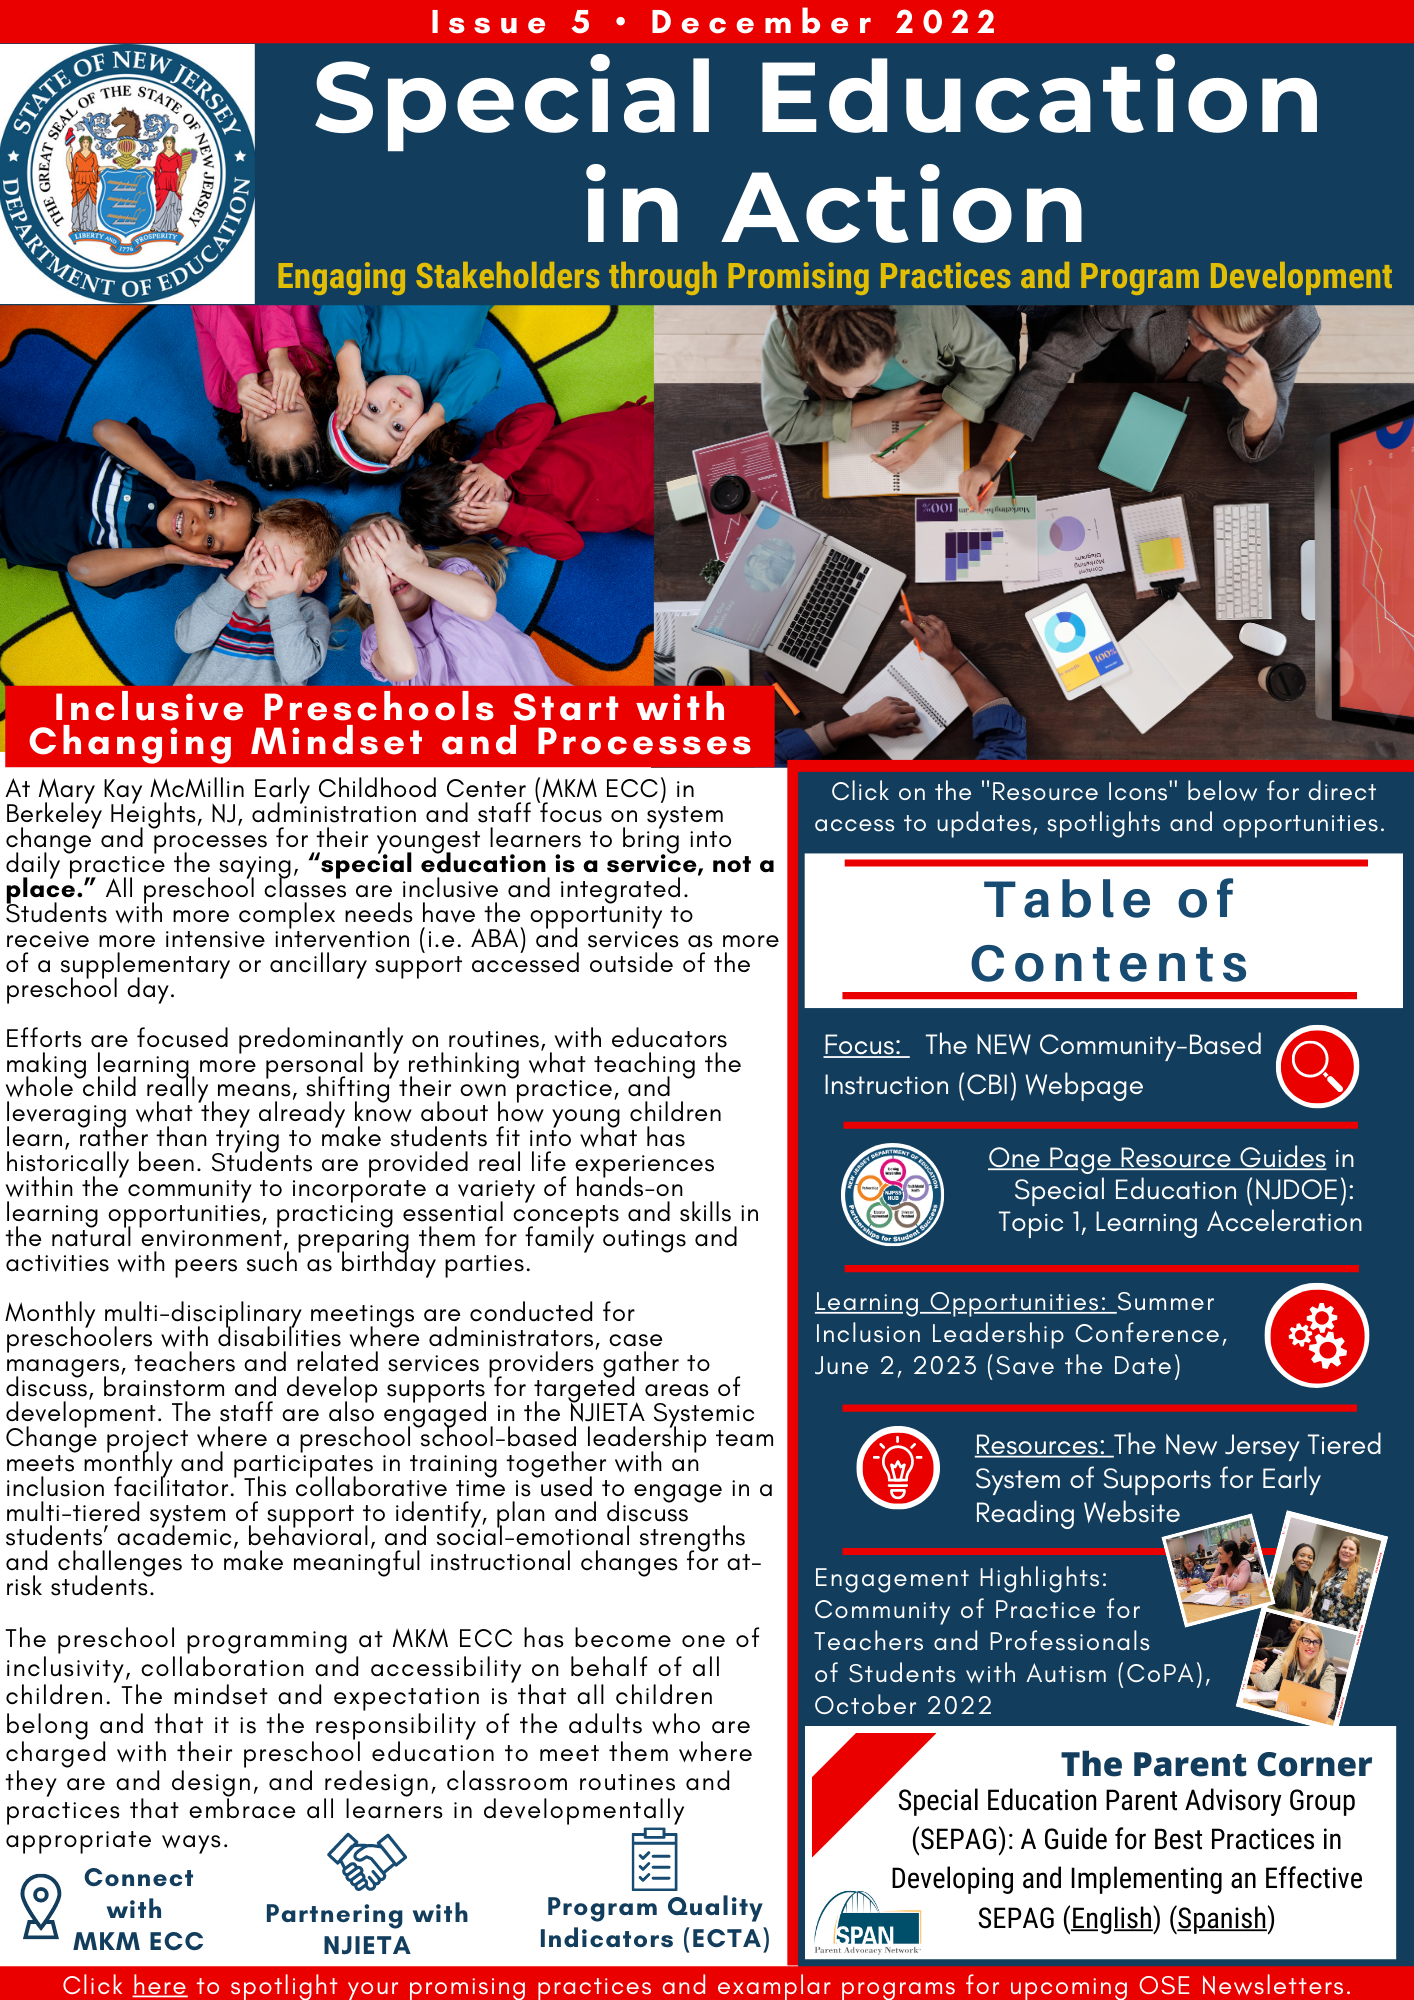 Cover page of the 5th newsletter as a clickable image